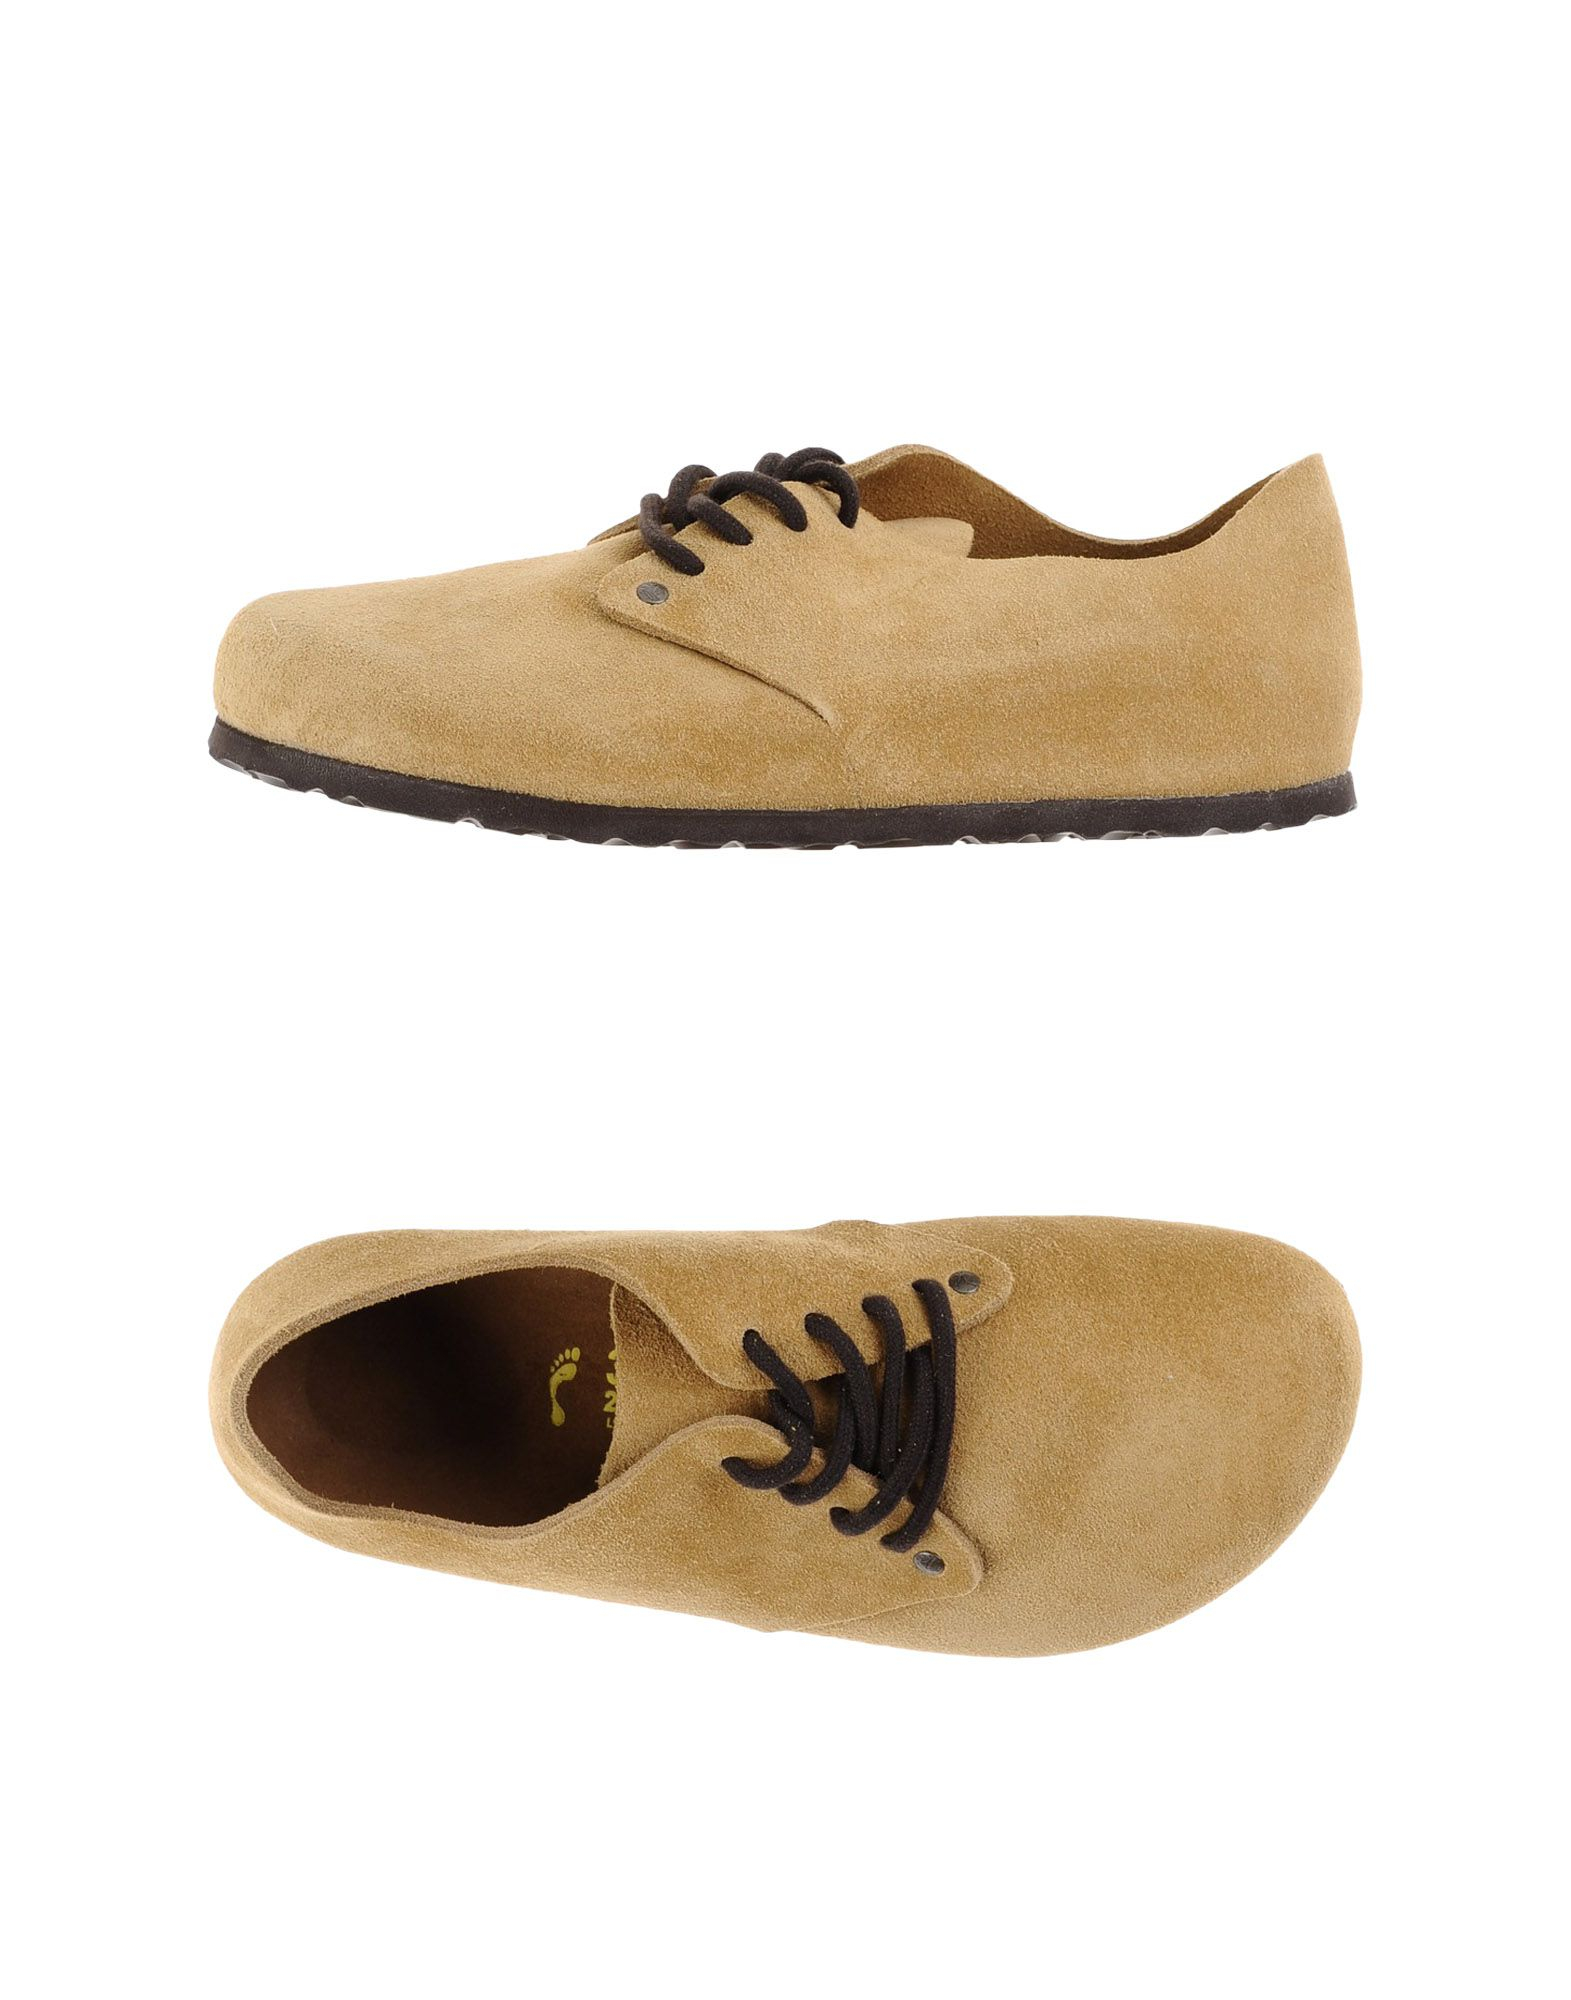 Birkenstock Lace-Up Suede Shoes in Sand 